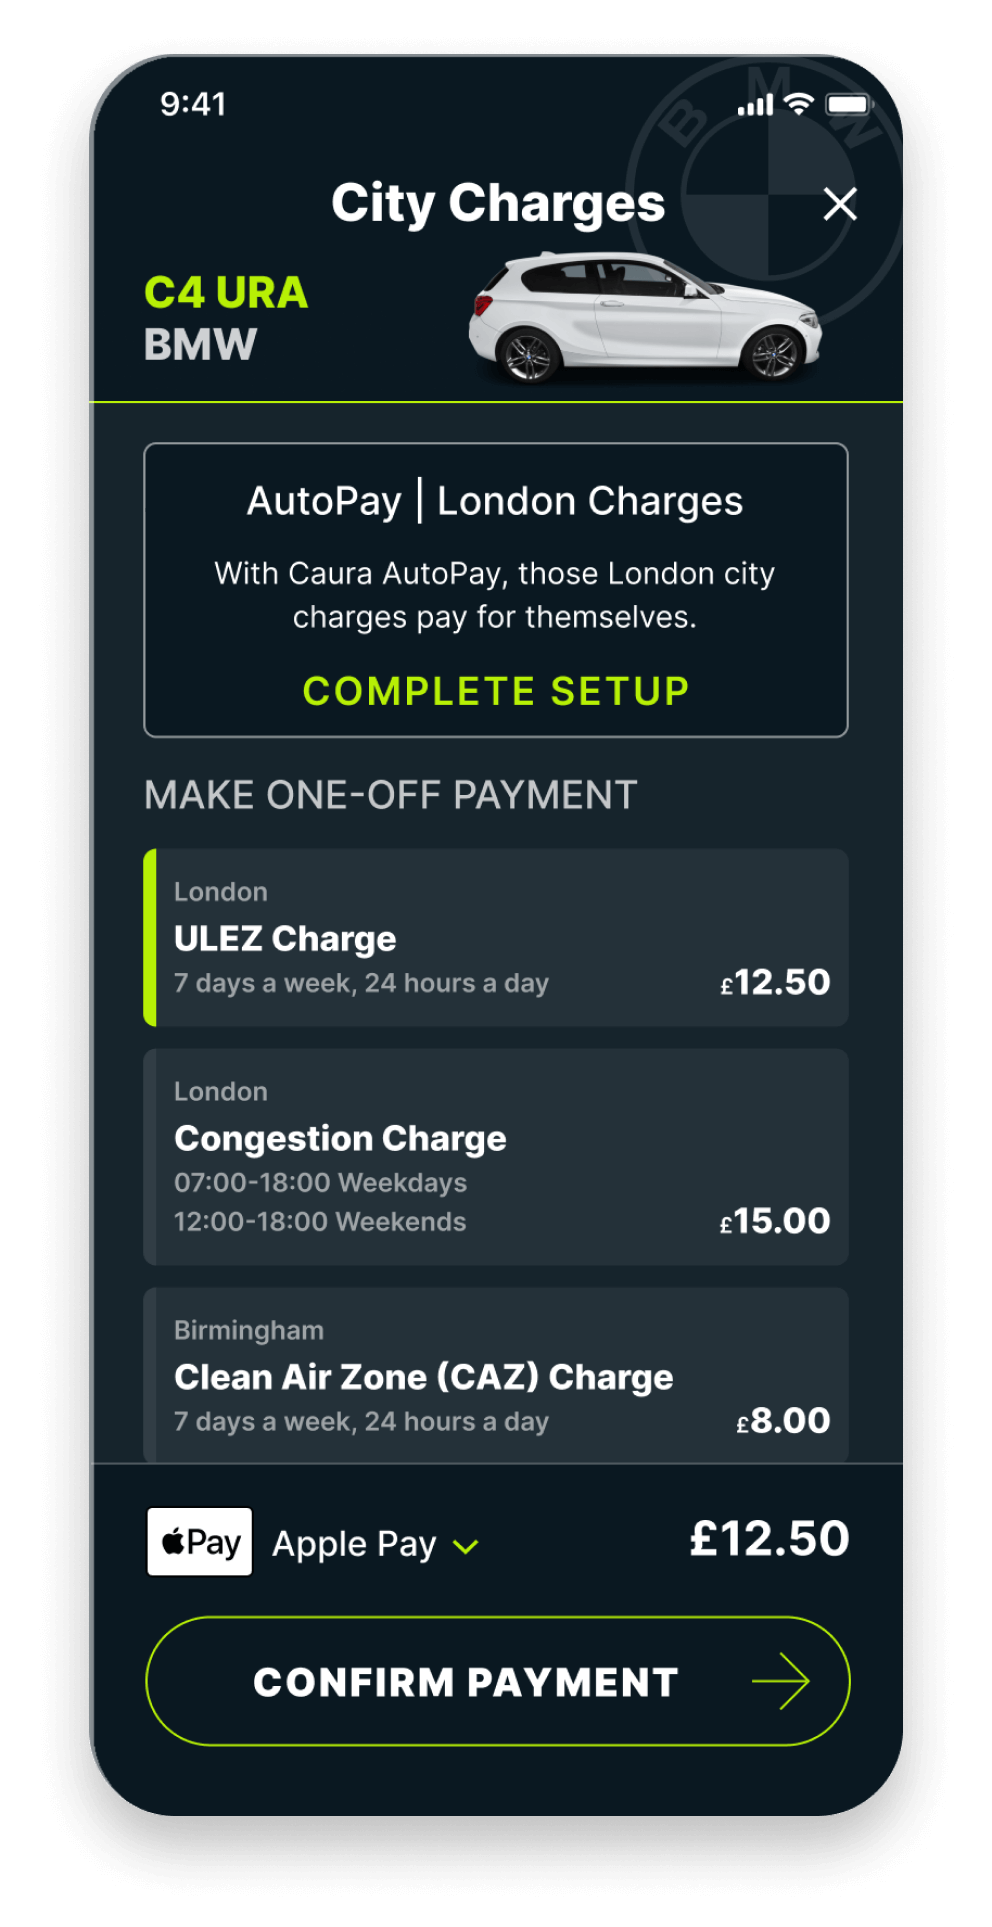 ULEZ charge showing on the Caura city charges payment screen